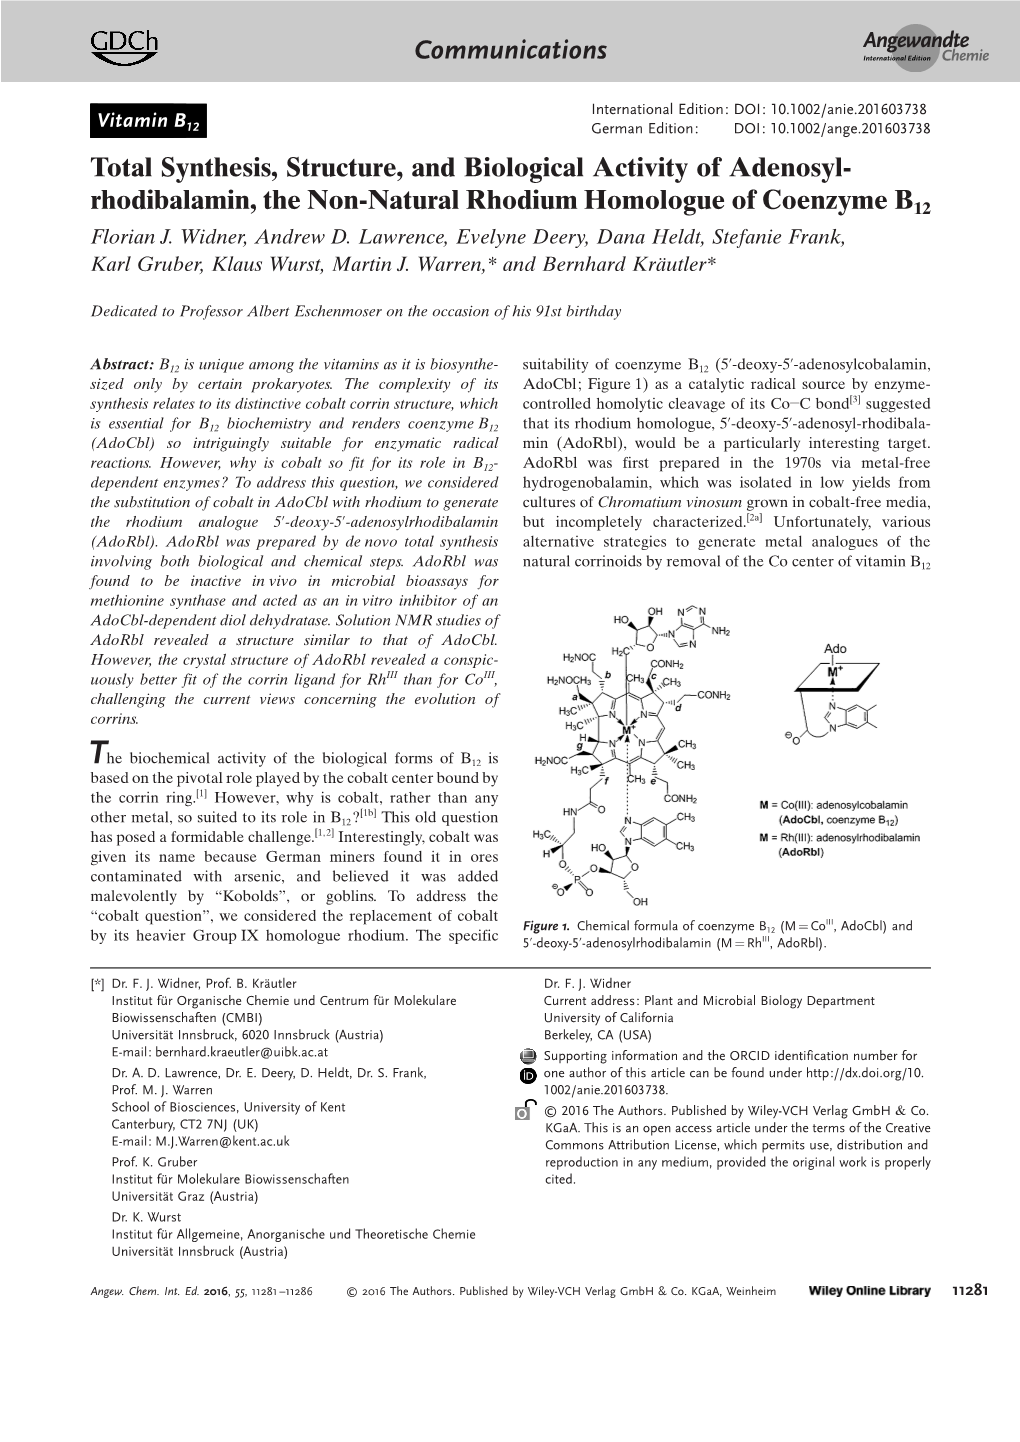 Total Synthesis, Structure, and Biological Activity Of